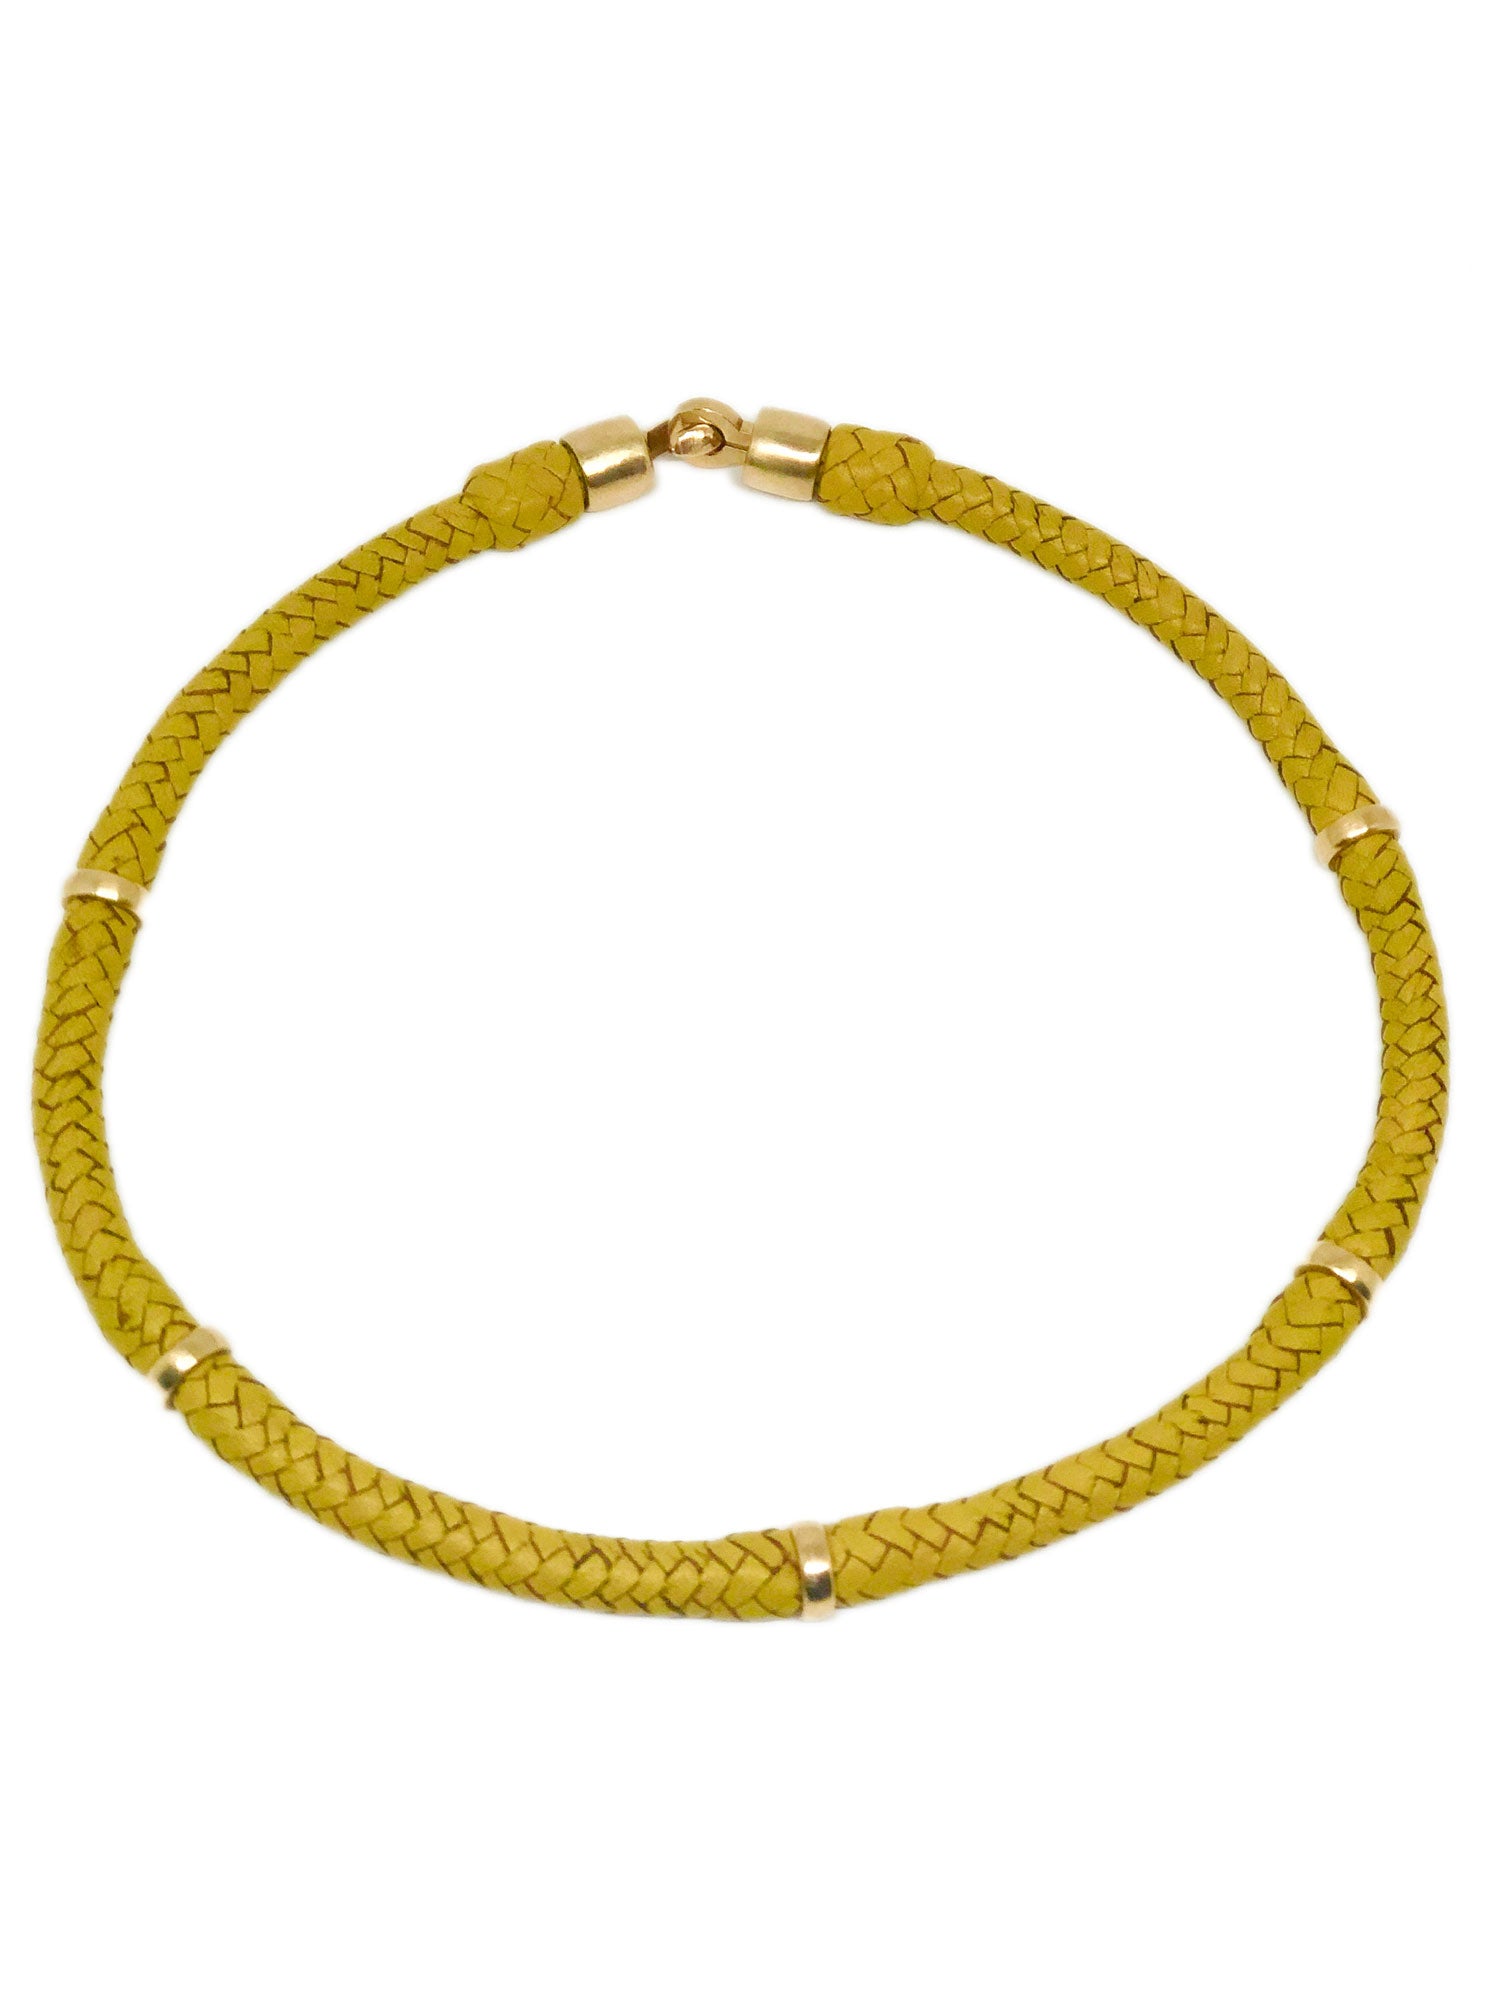 LILIKOI 18KT LUXE GOLD LEATHER CHOKER